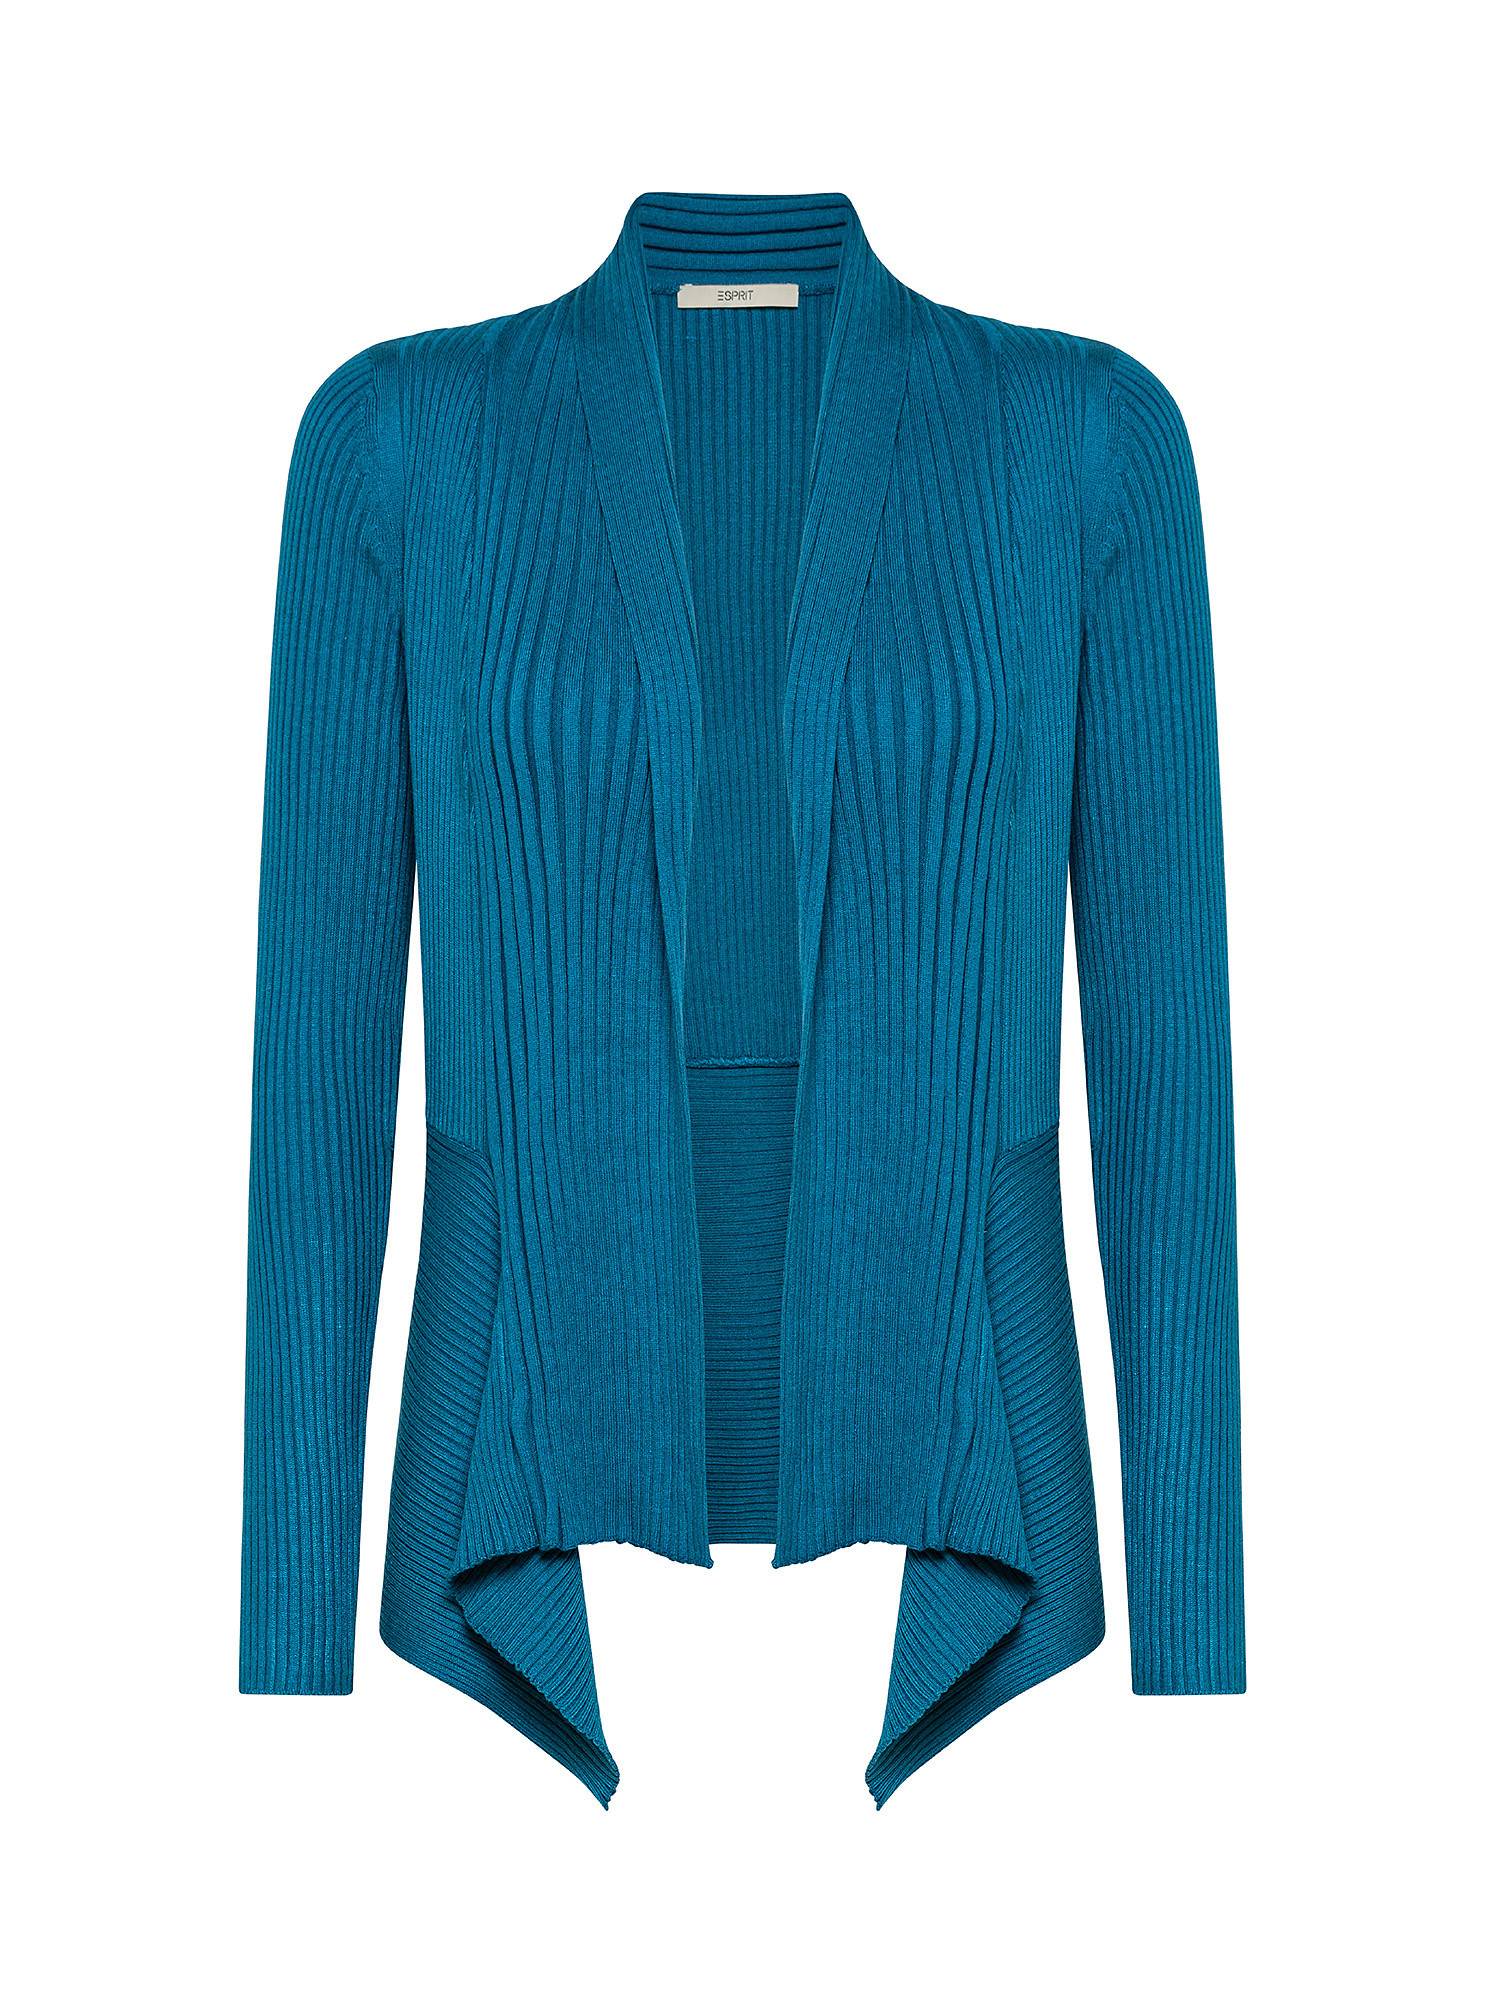 Open ribbed cardigan, Turquoise, large image number 0